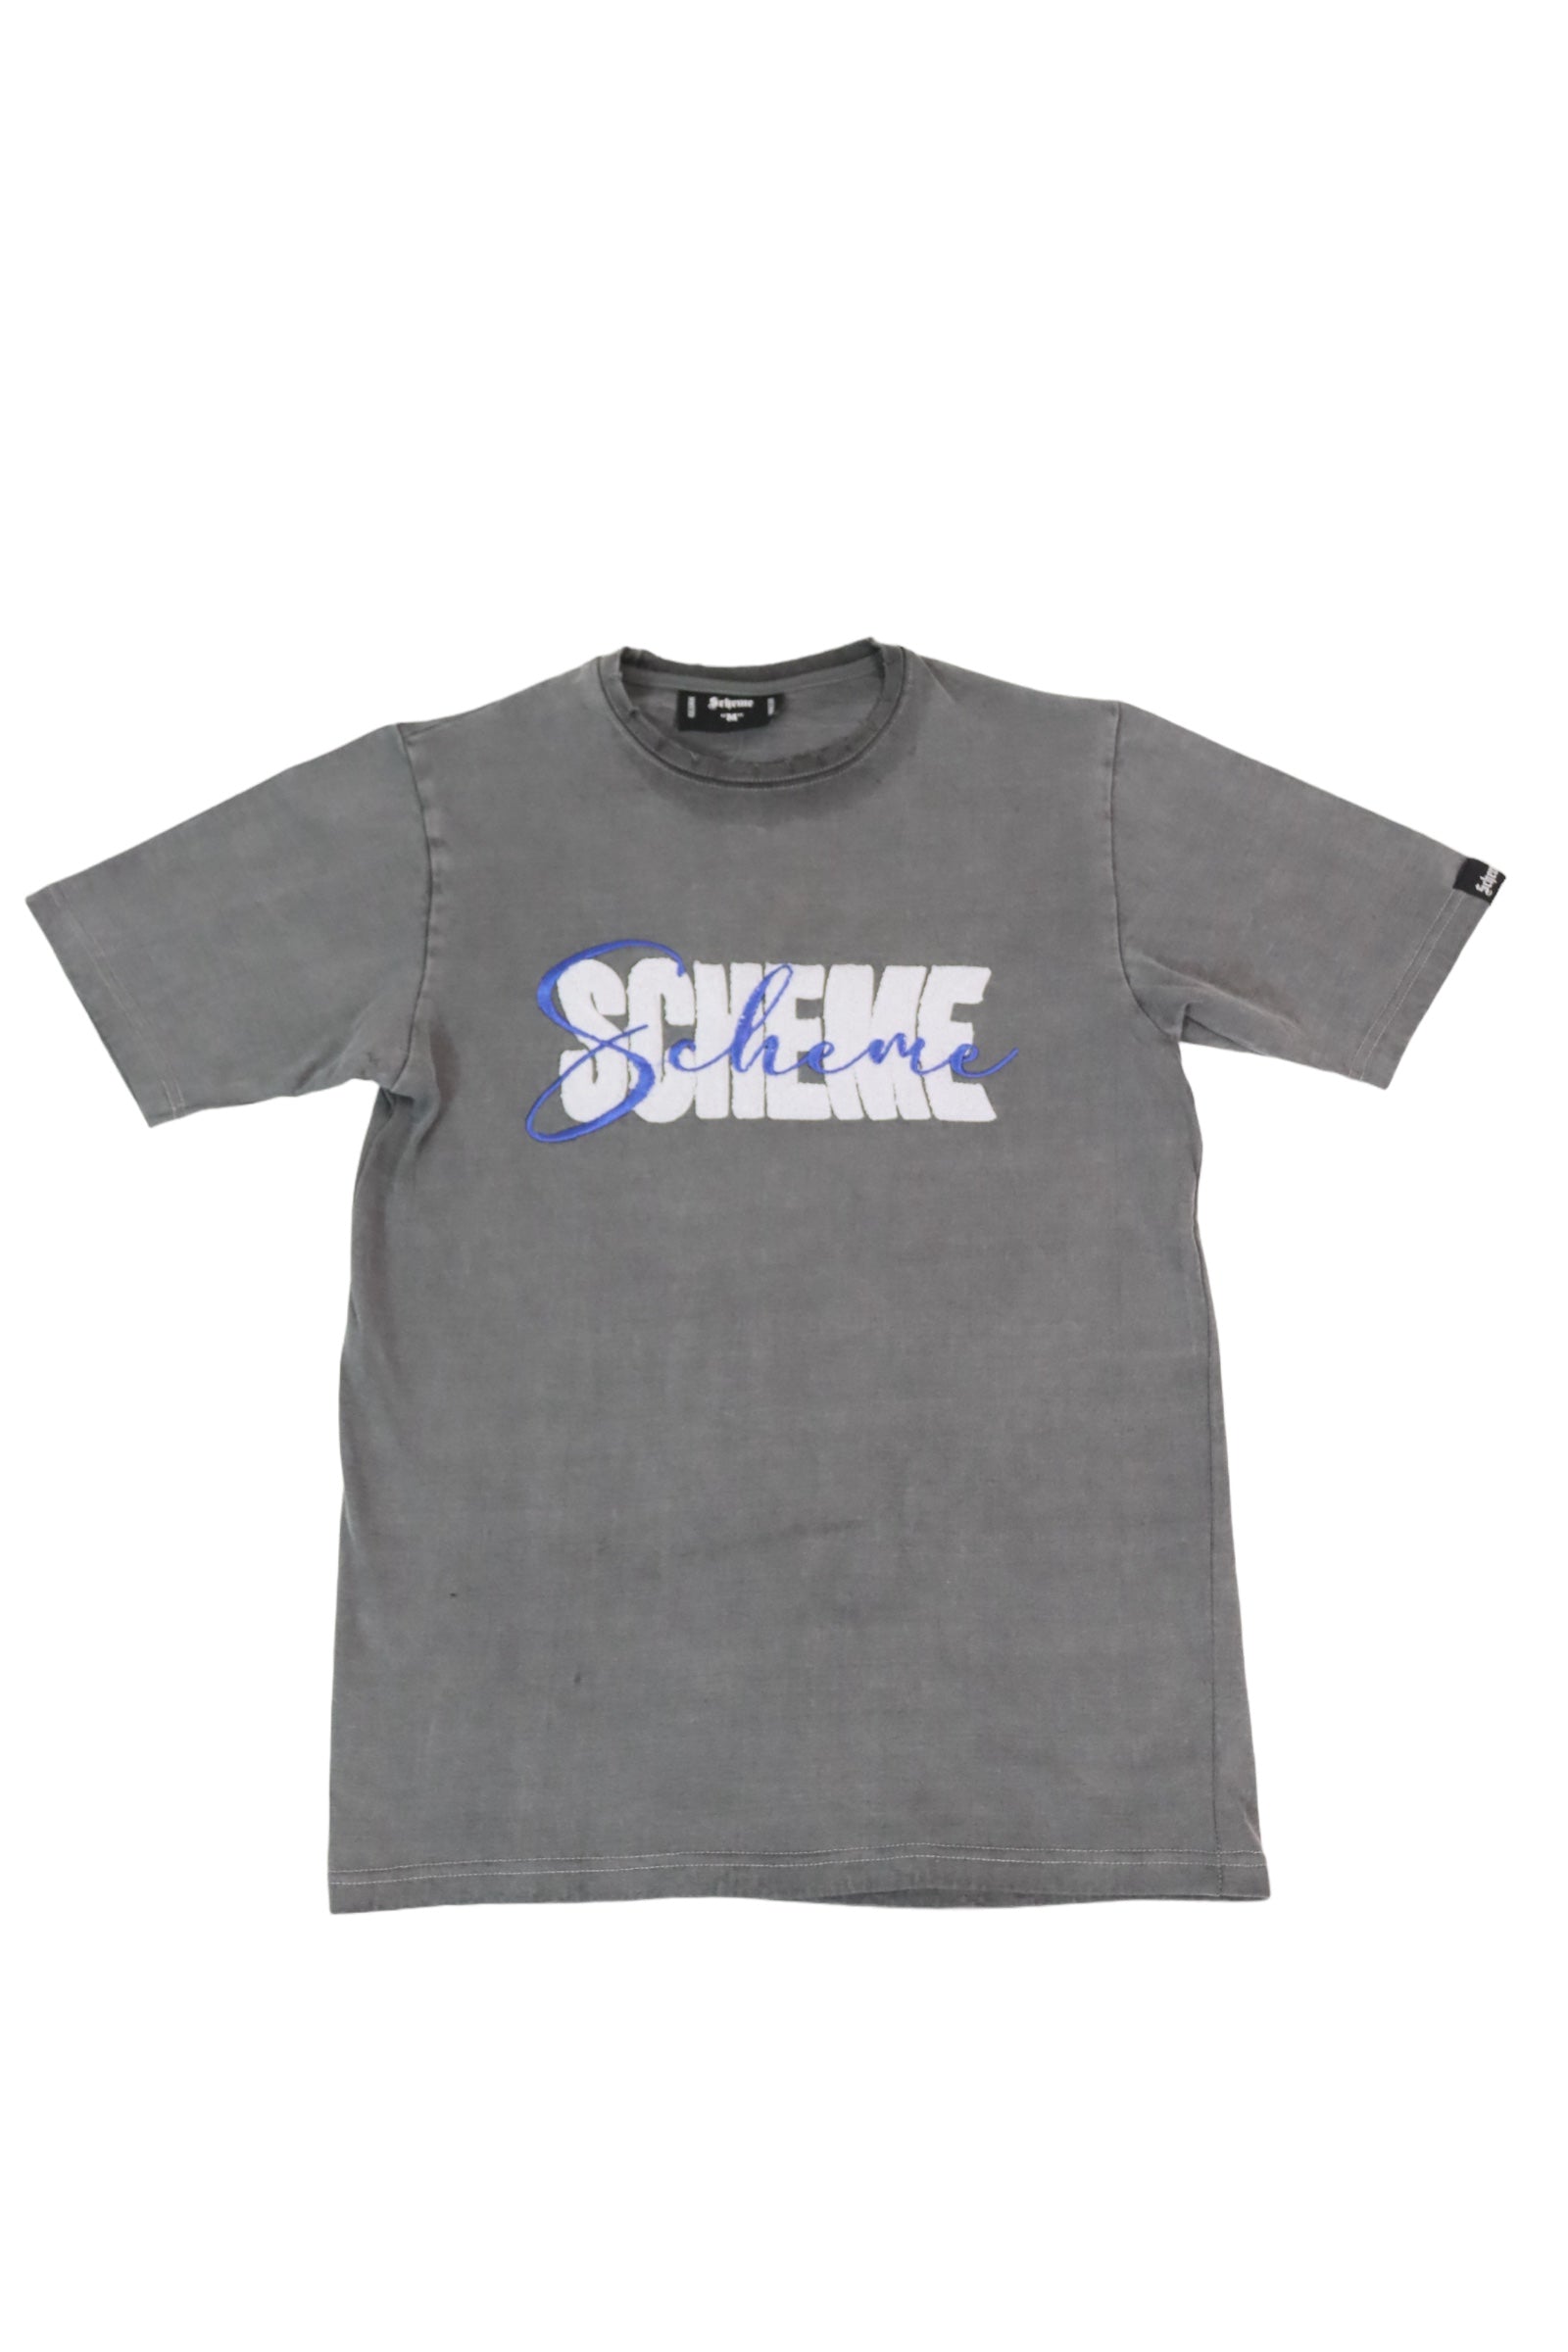 "Scheme" Distressed Chenille Tee - Washed Gray